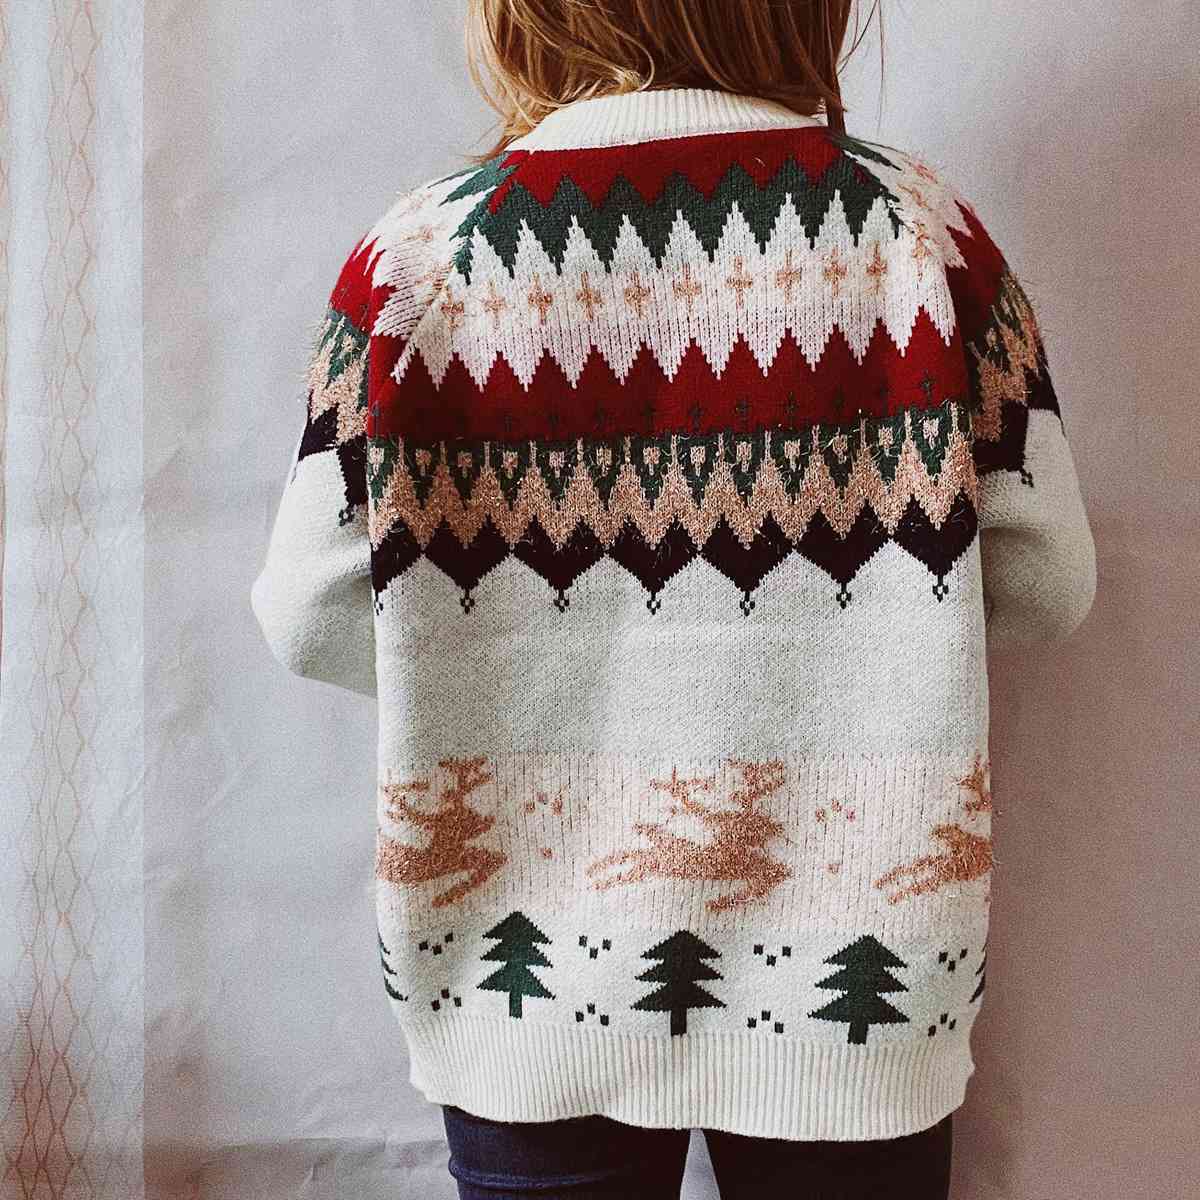 Reindeer Bold Knit Round Neck Classy Holiday Fair Isle Christmas Sweater